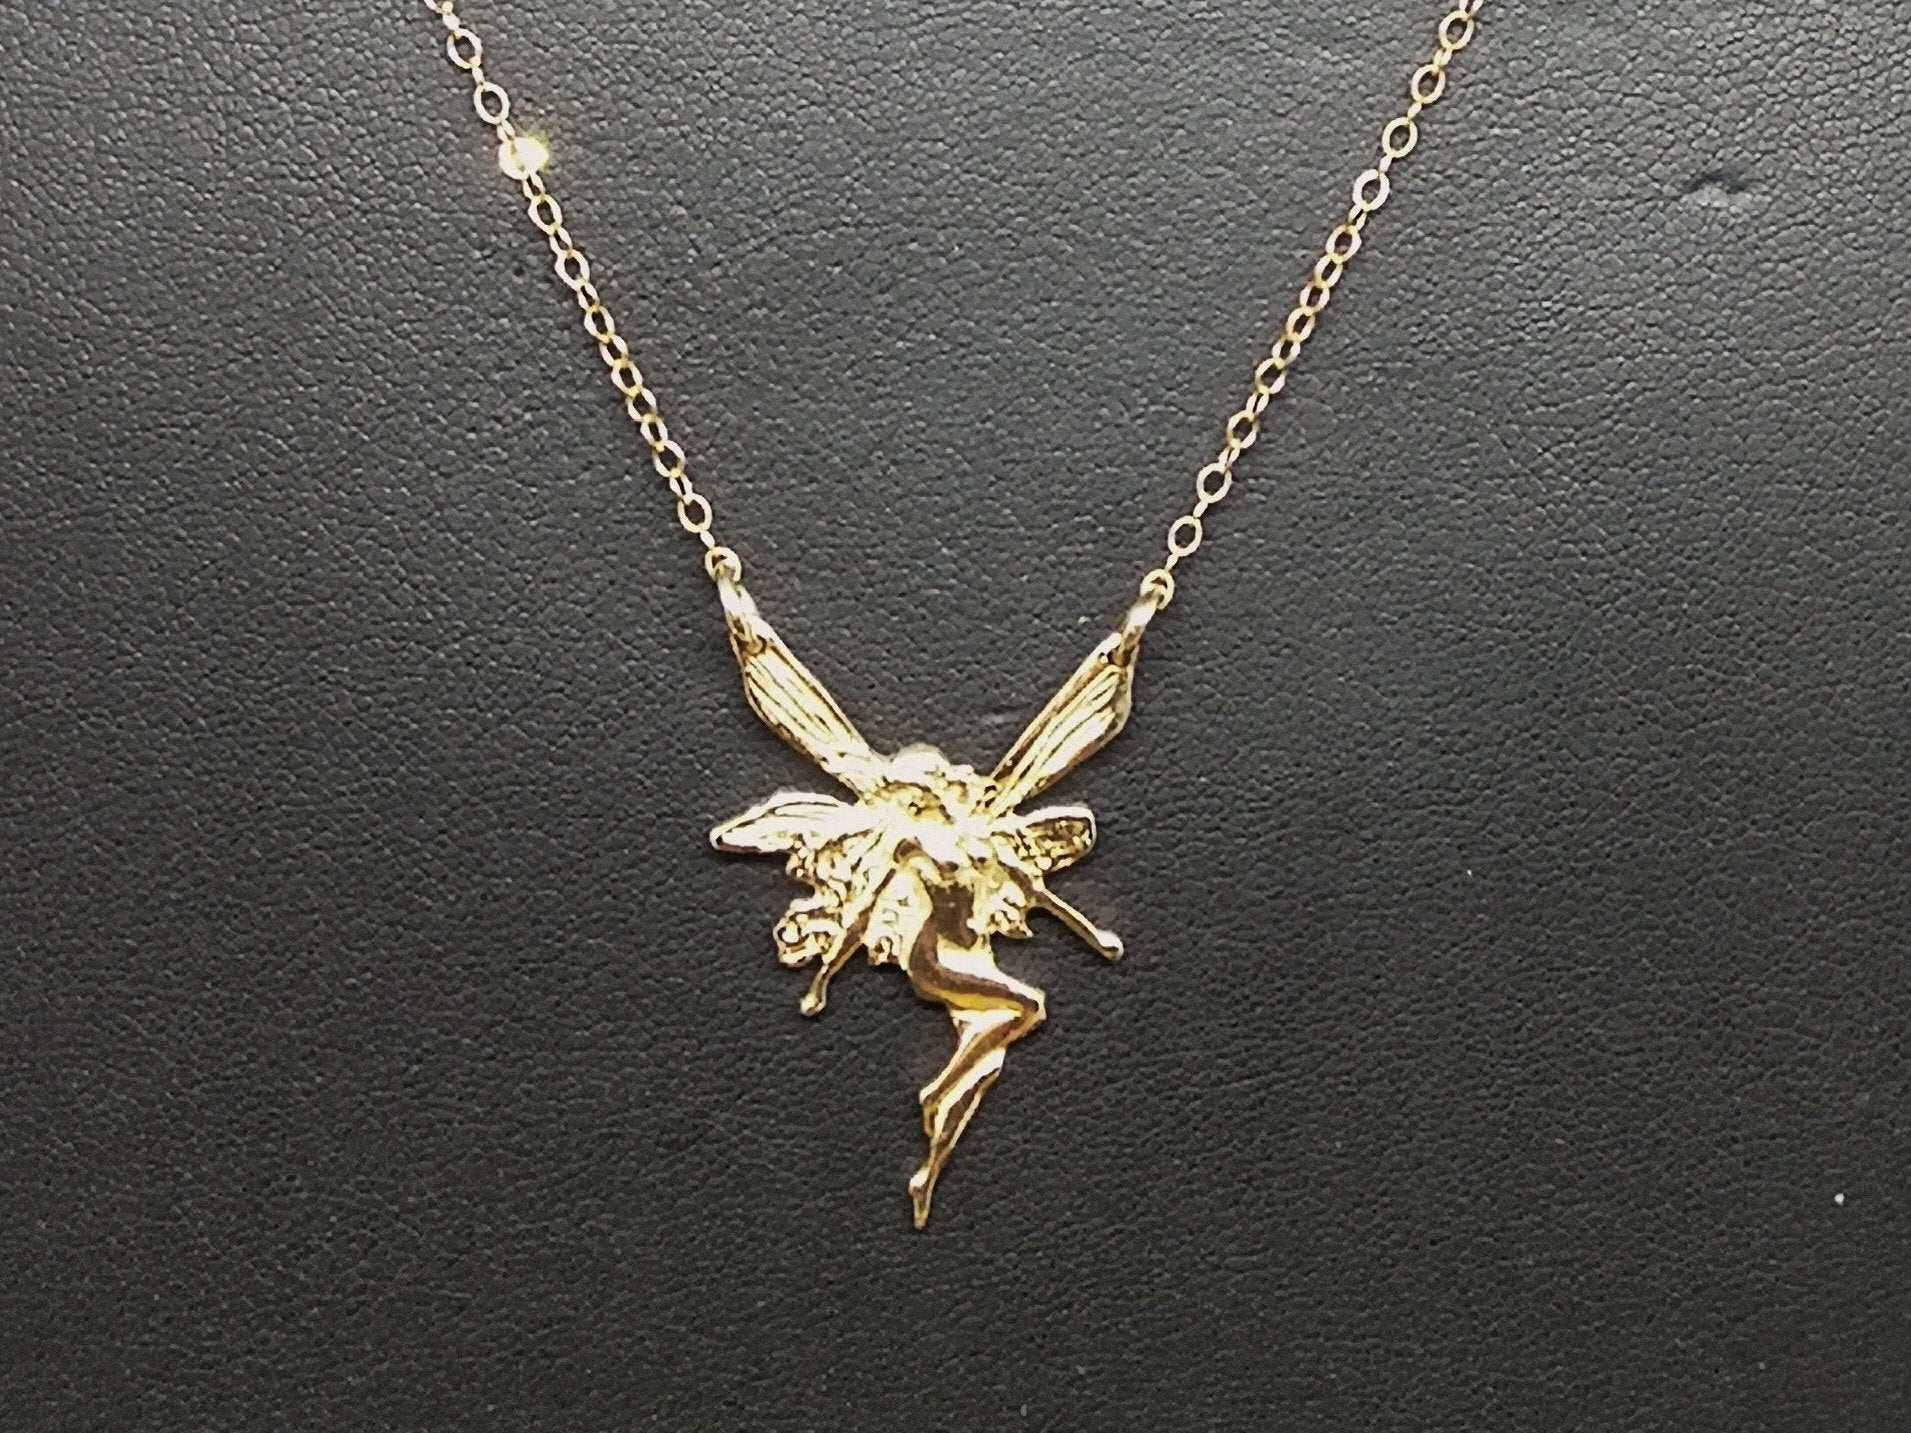 Art Nouveau Fairy necklace in Sterling Silver or Antique Bronze